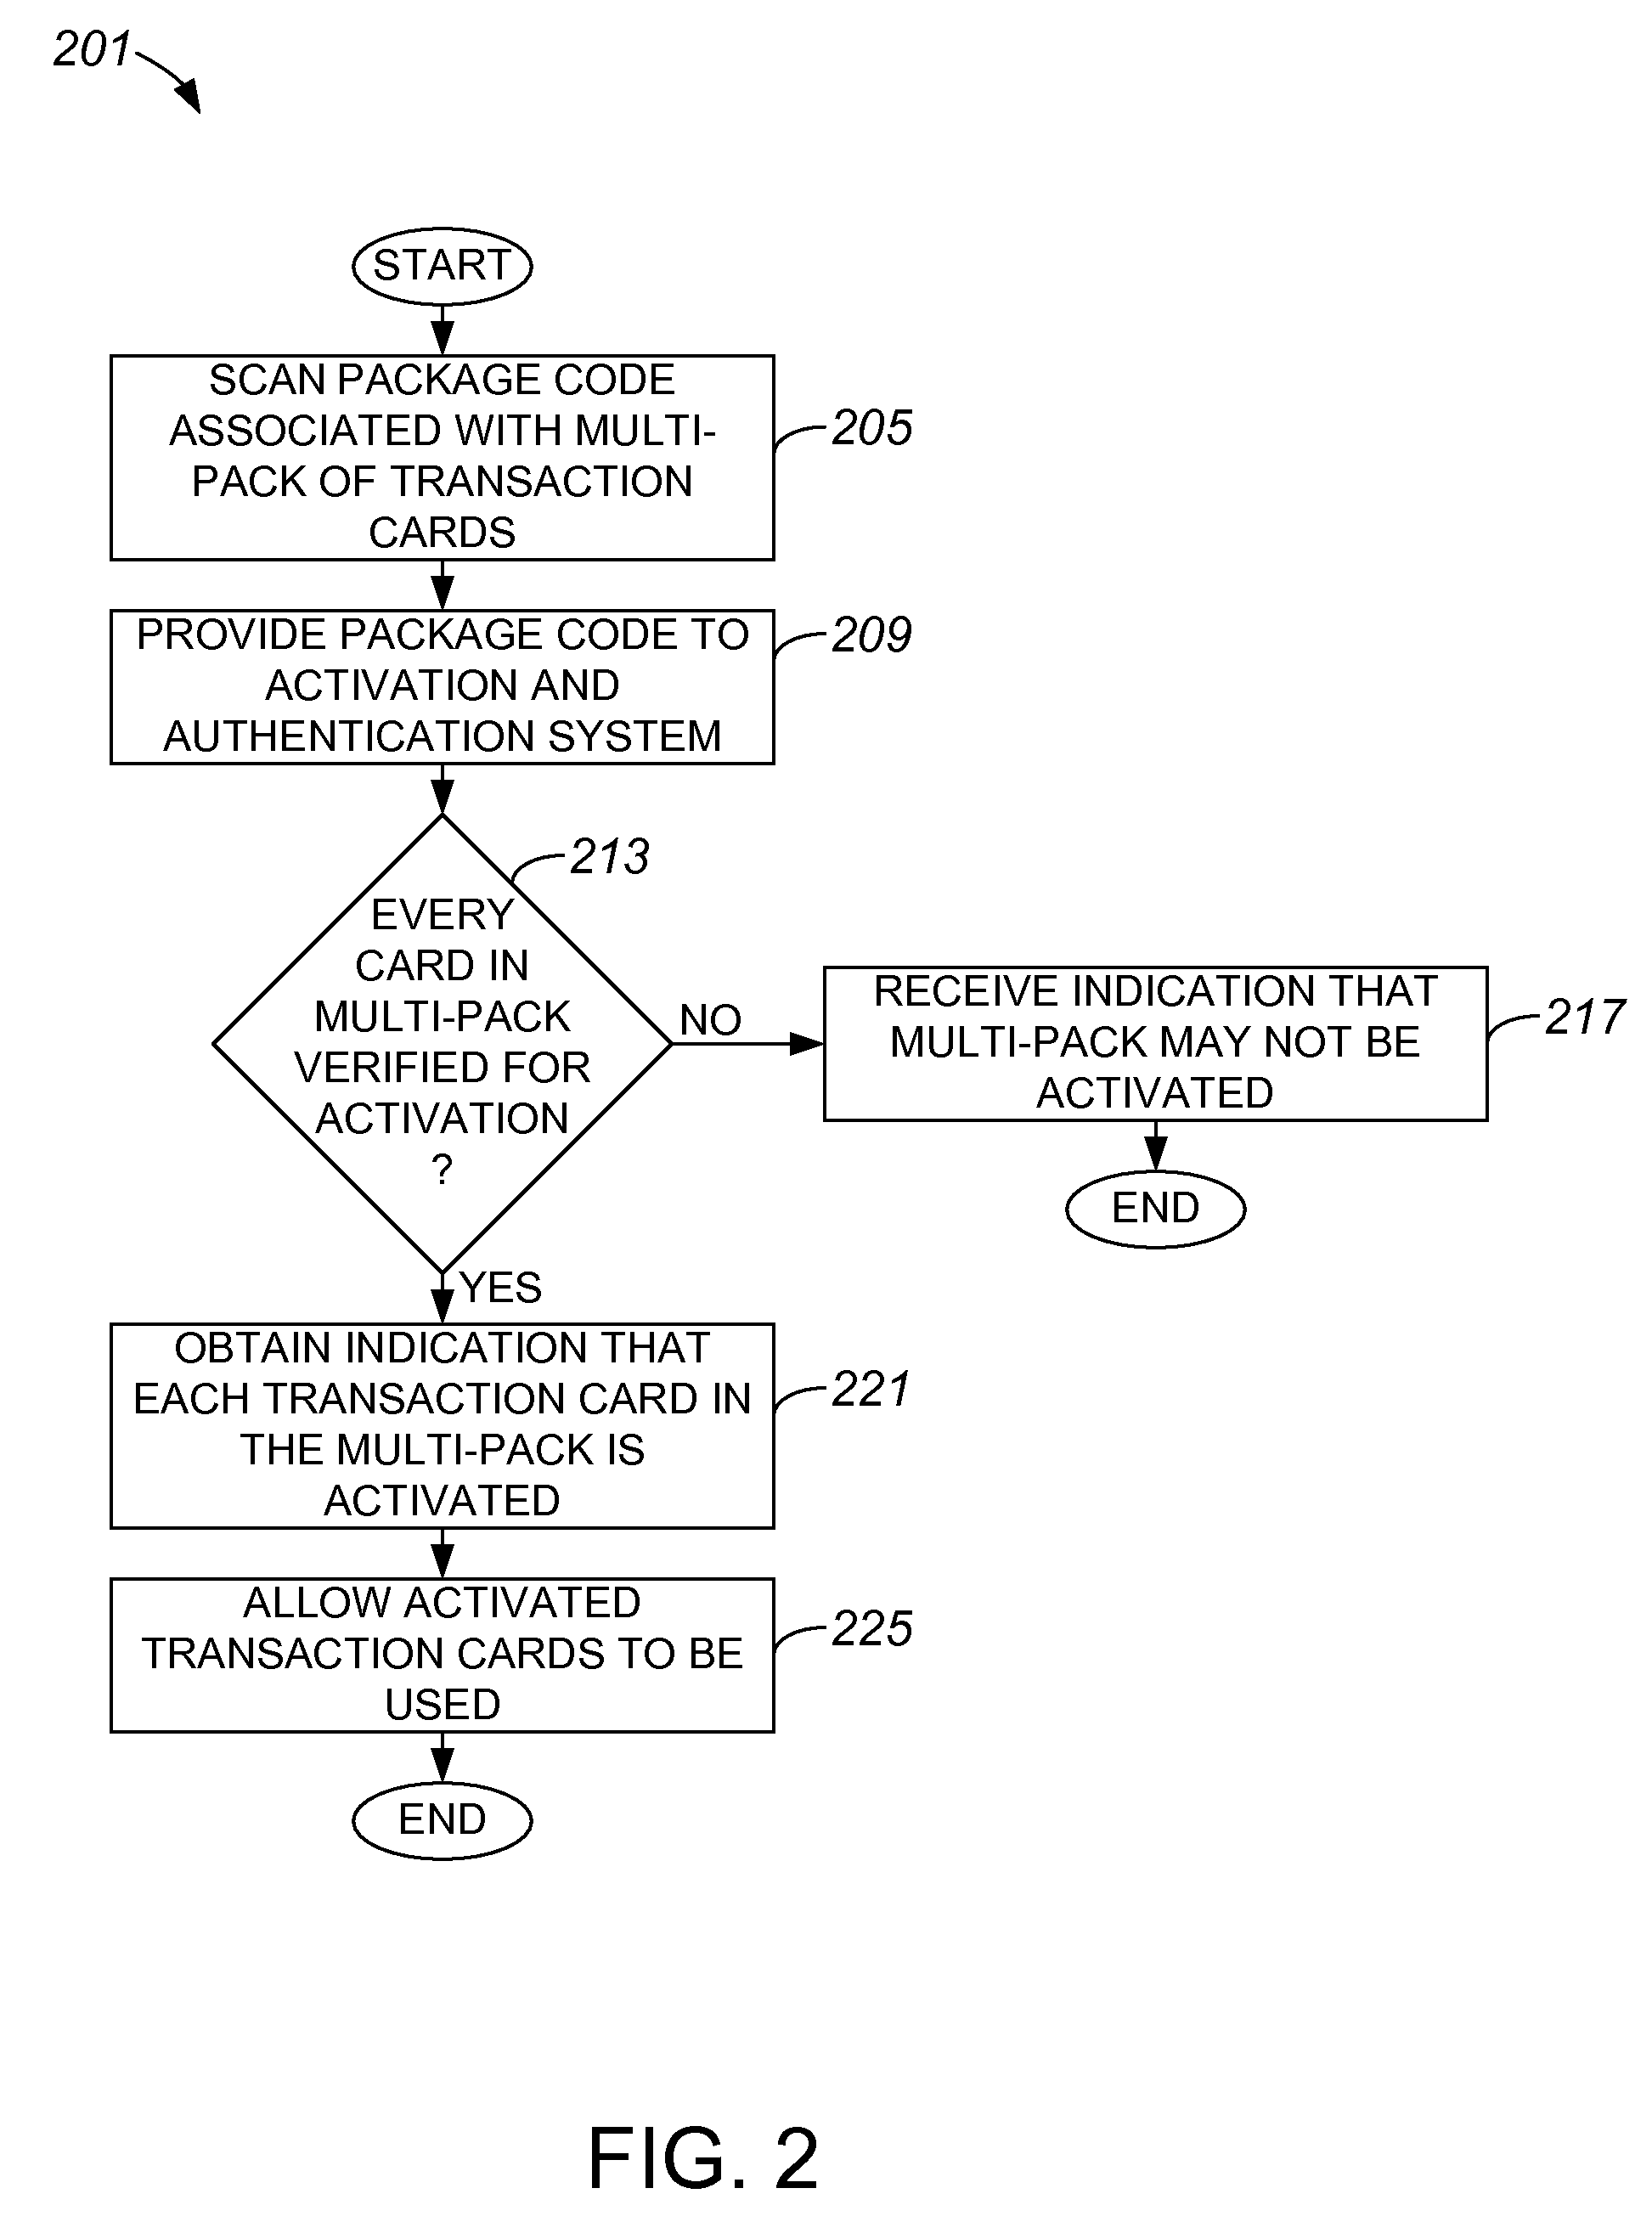 Method for Assembling and Activating a Multi-Pack Package of Transaction Cards